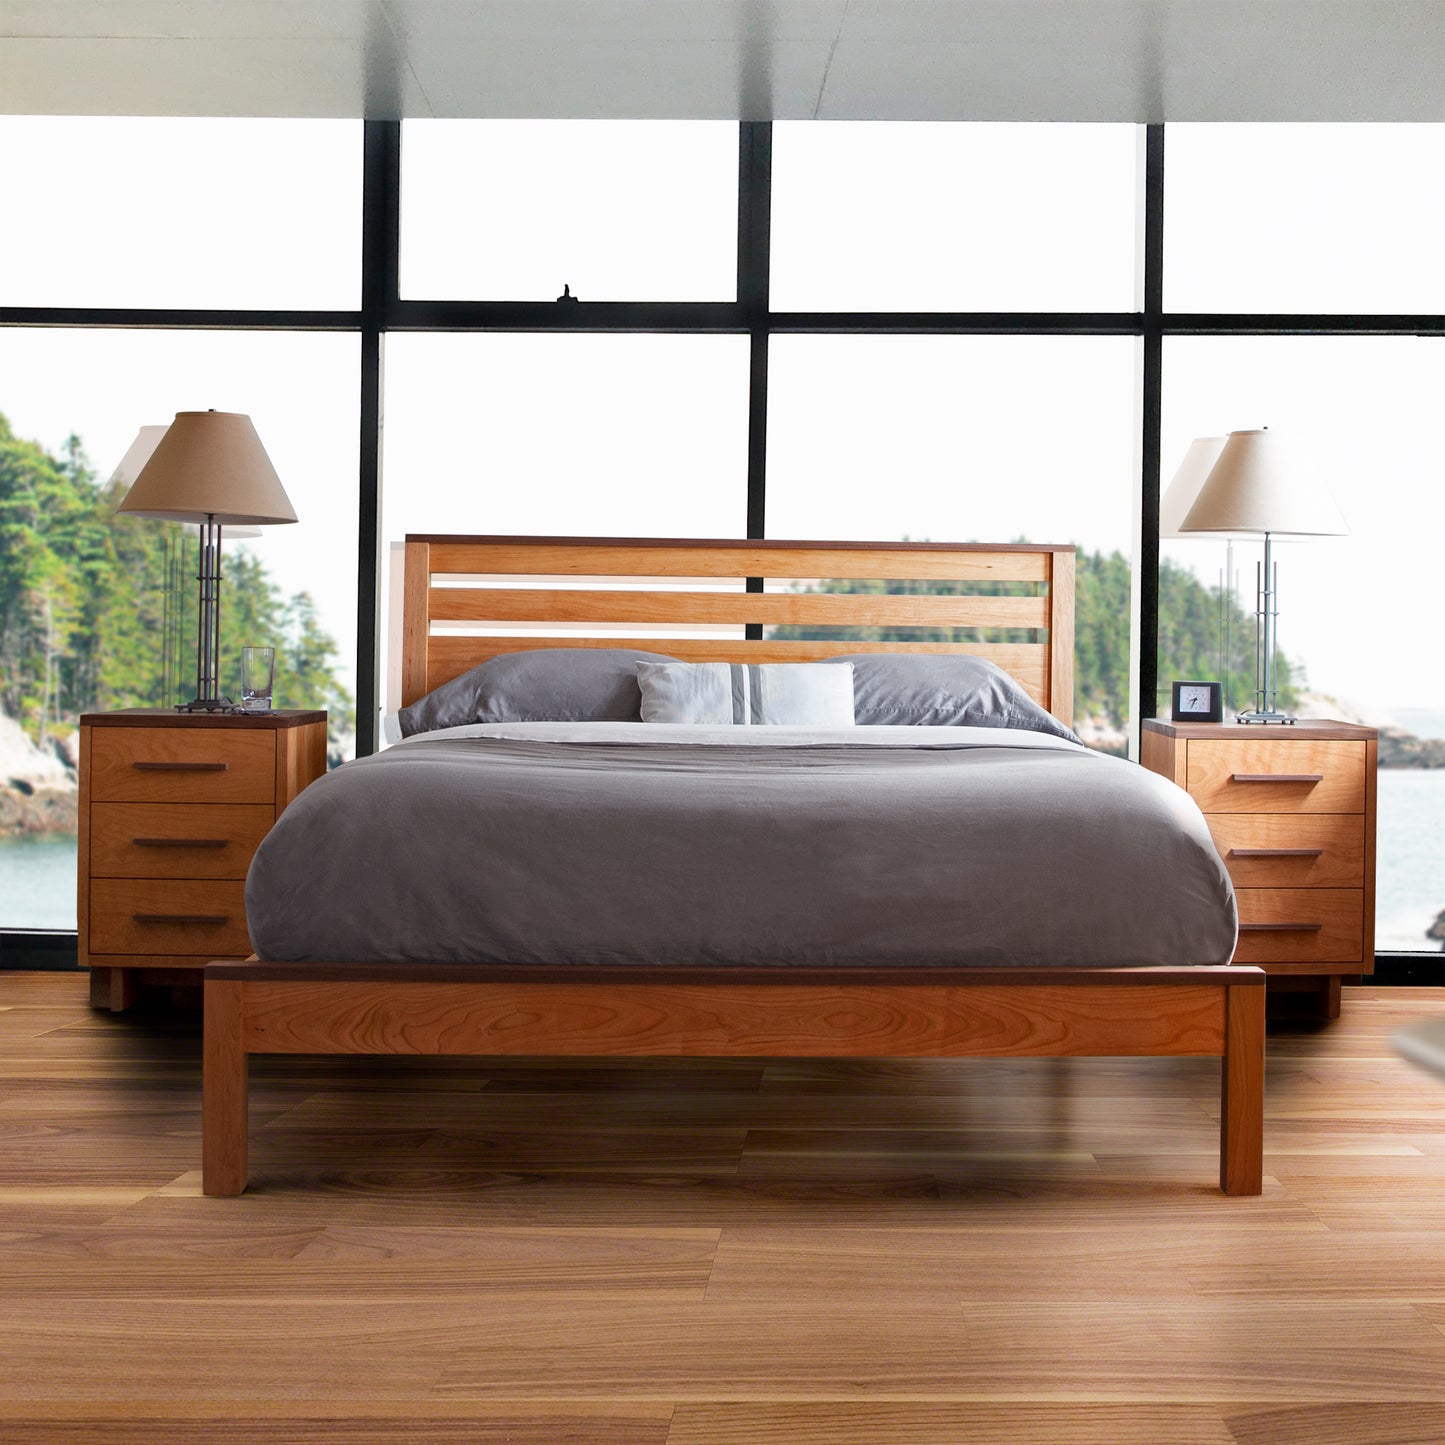 A modern eco-friendly bedroom with a solid Skyline Panel Bed by Vermont Furniture Designs and matching side tables, set against large windows overlooking a forested lakeside.